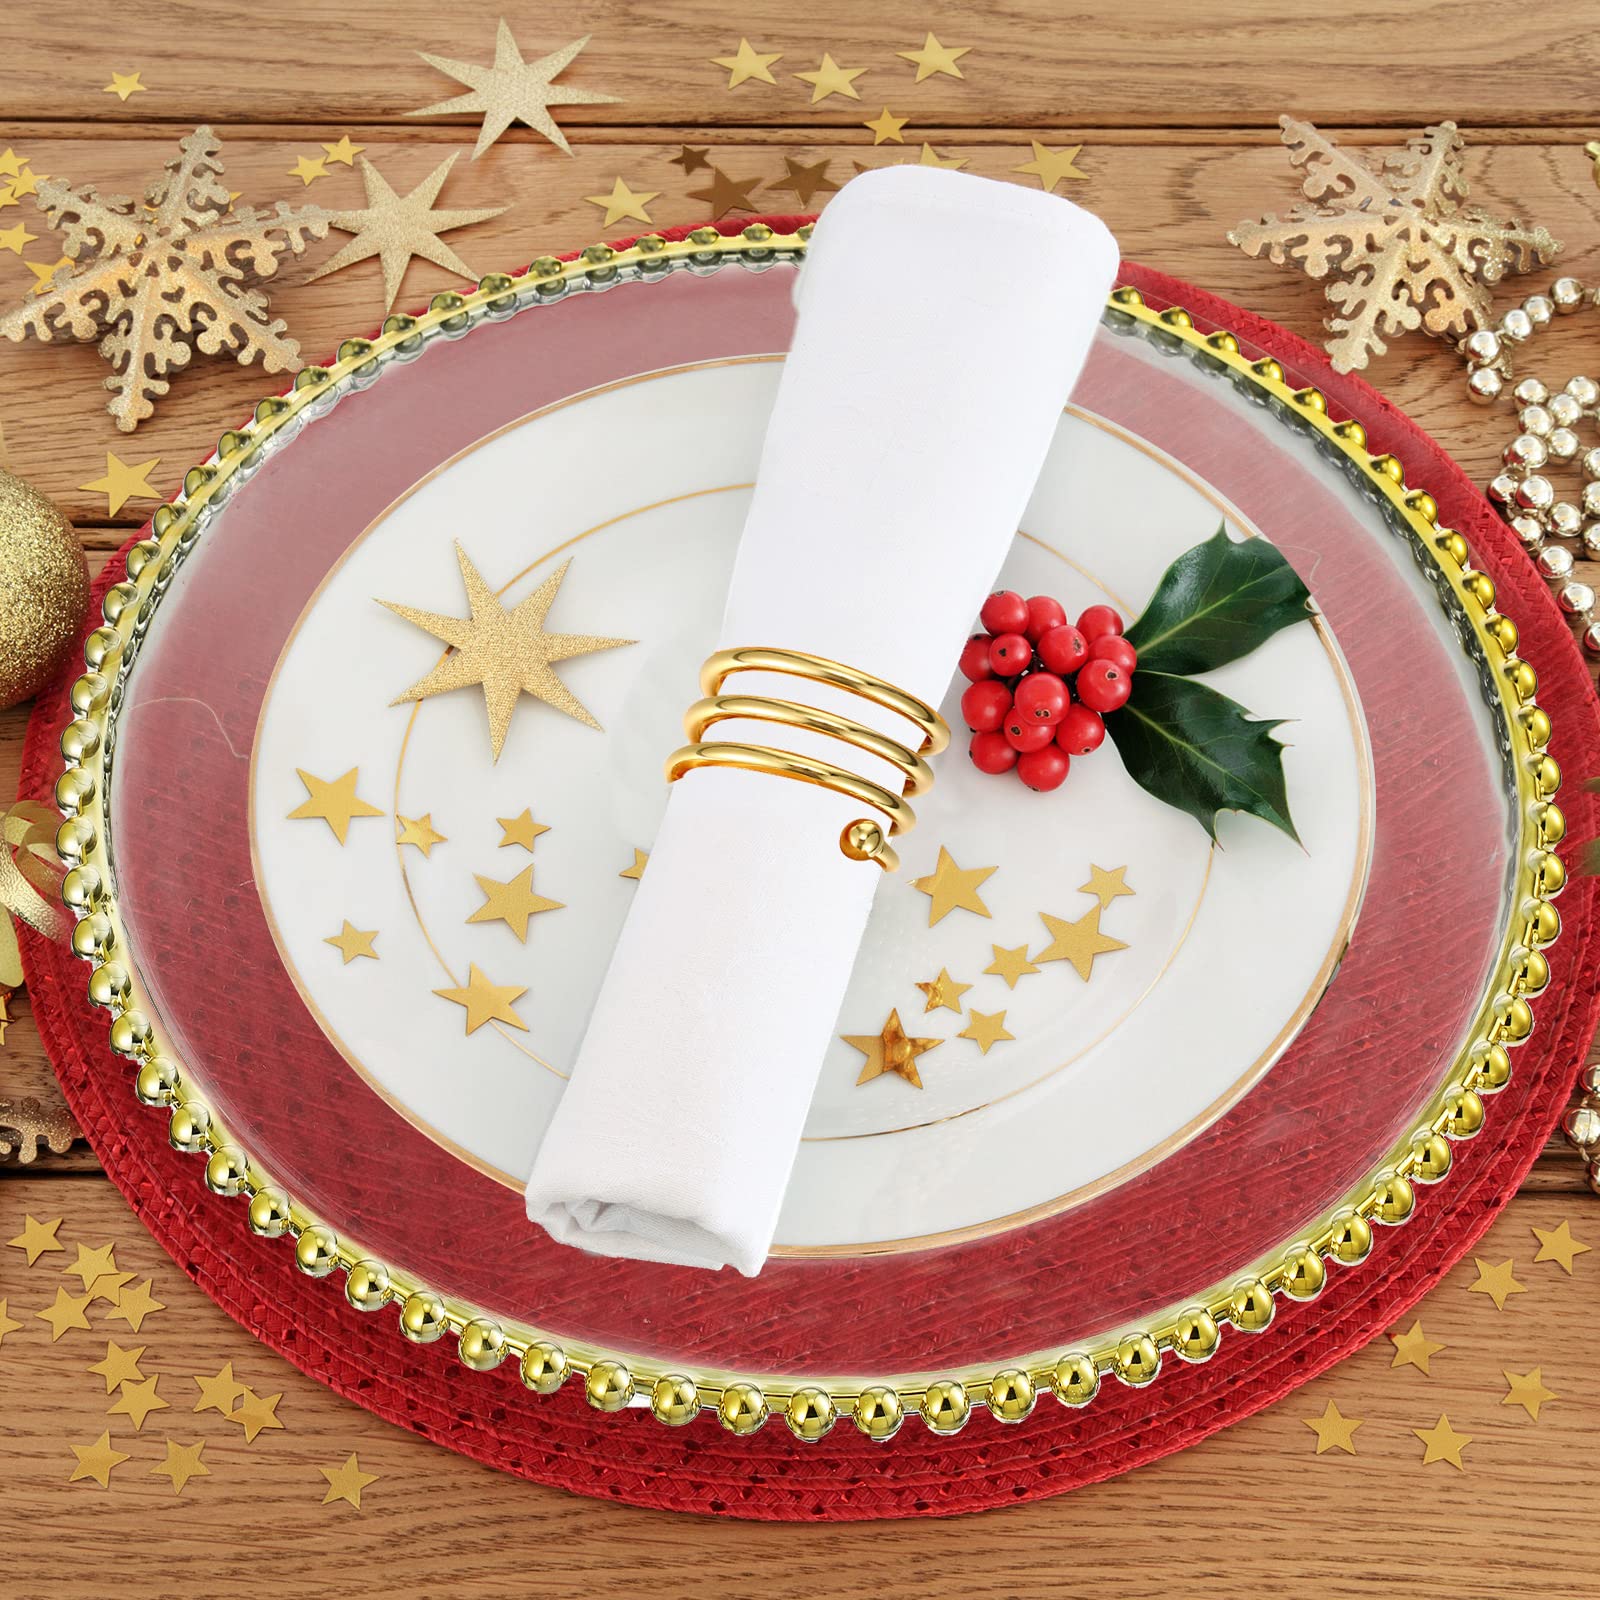 Yinder 12 Set Gold Beaded Charger Plates and Napkin Rings, Acrylic Gold Beaded Clear Chargers for Dinner Serving Plates with Gold Beaded Rim Wedding Dinning Table Party Decoration